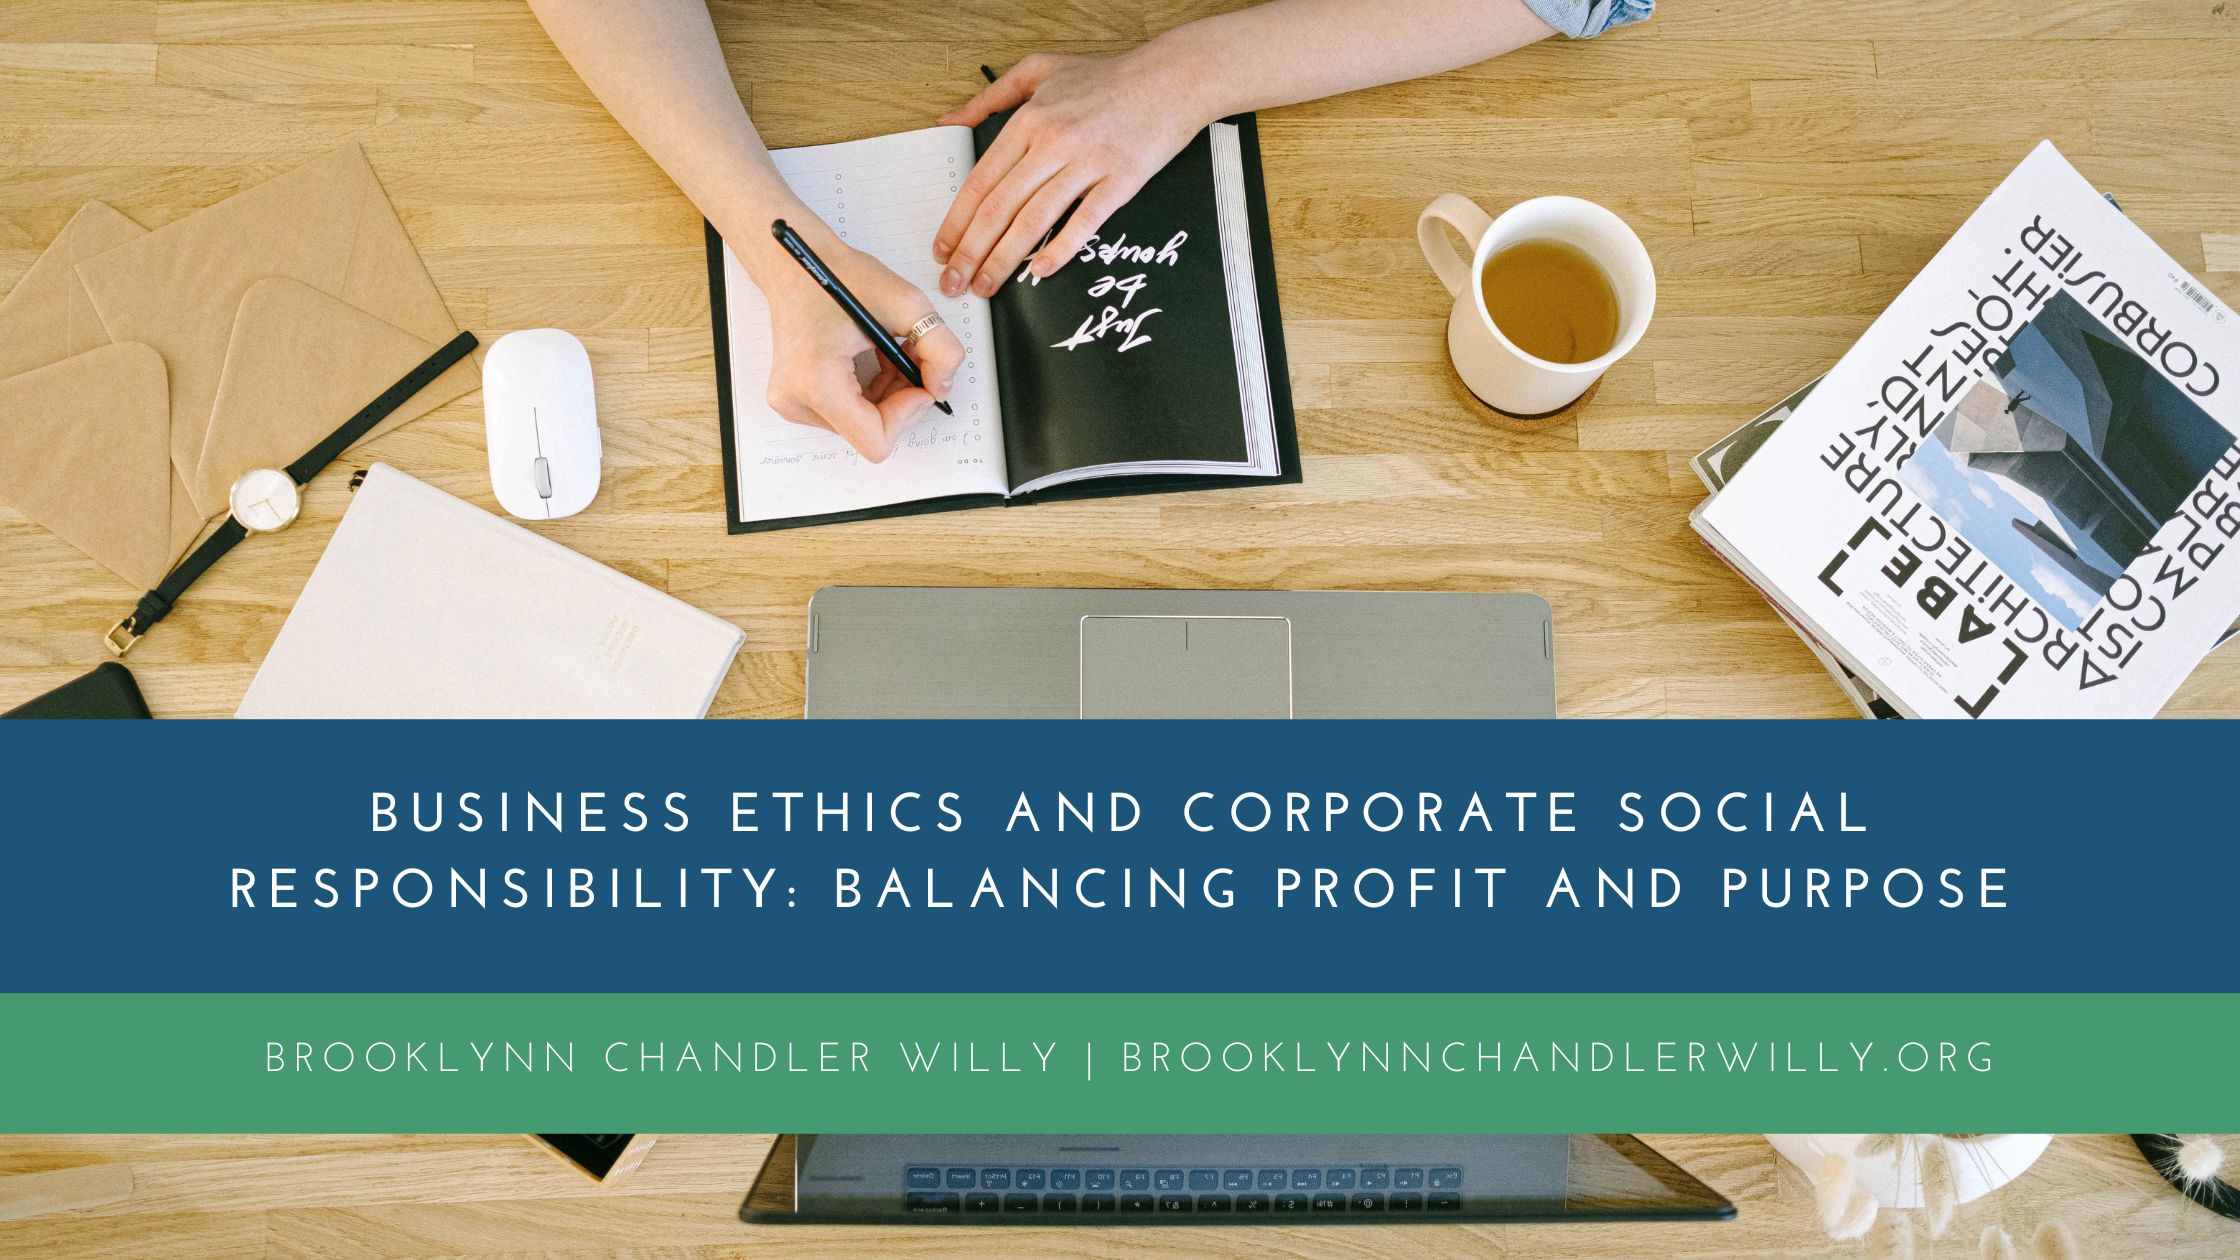 BUSINESS ETHICS AND CORPORATE SOCIAL
RESPONSIBILITY: BALANCING PROFIT AND PURPOSE

BROOKLYNN CHANDLER WILLY | BROOKLYNNCHANDLERWILLY. ORG